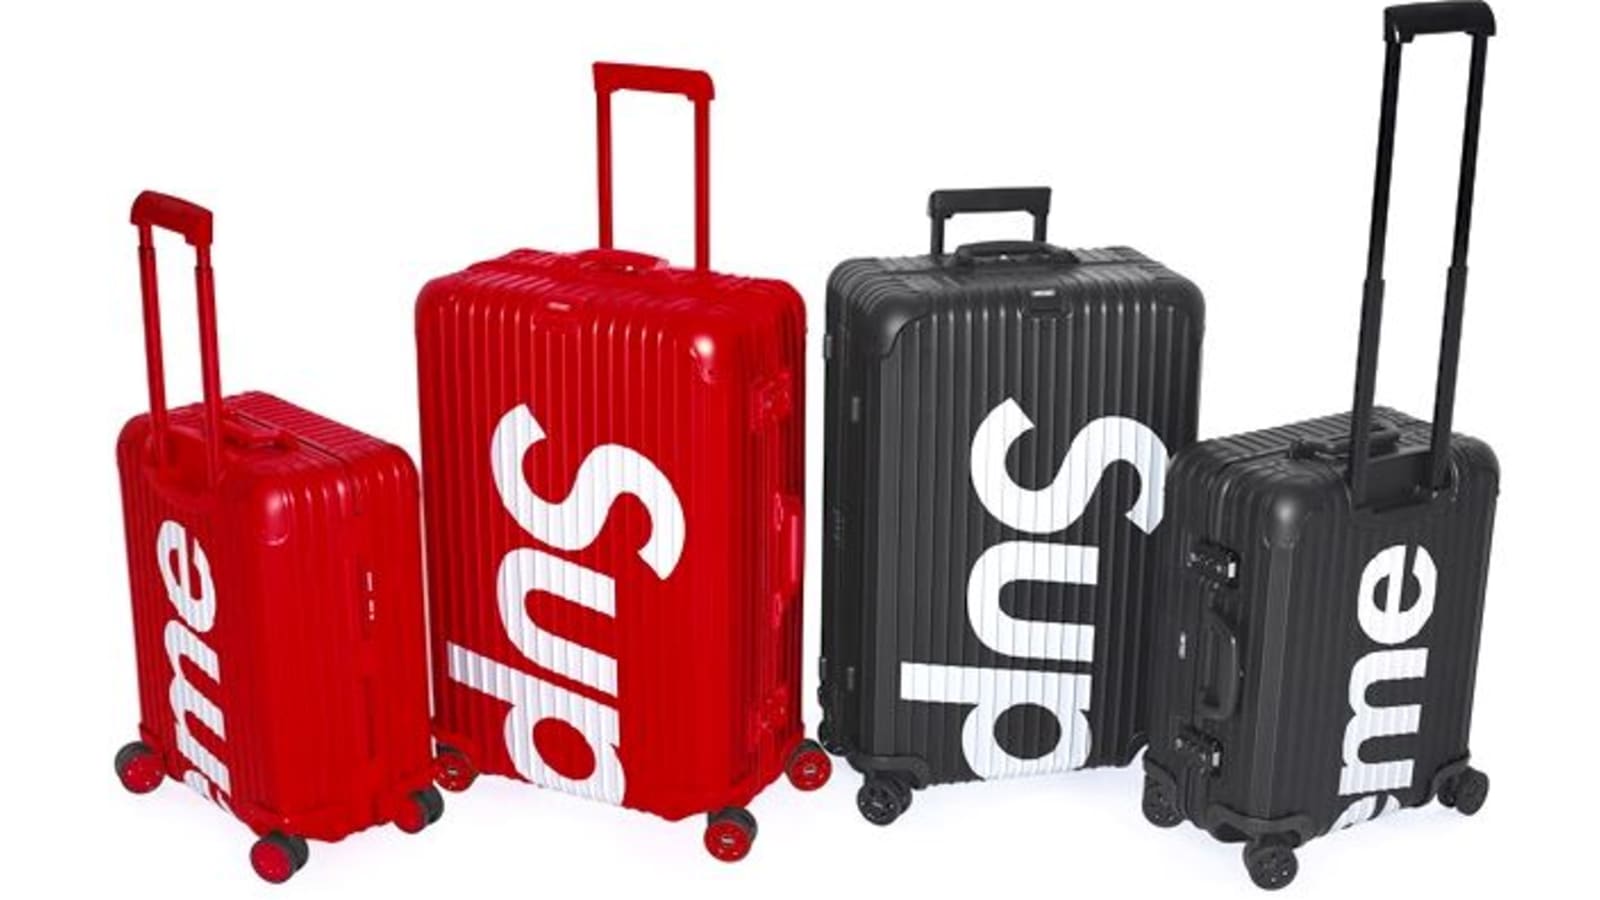 Wordle debuts ads—luggage brand Rimowa is the first